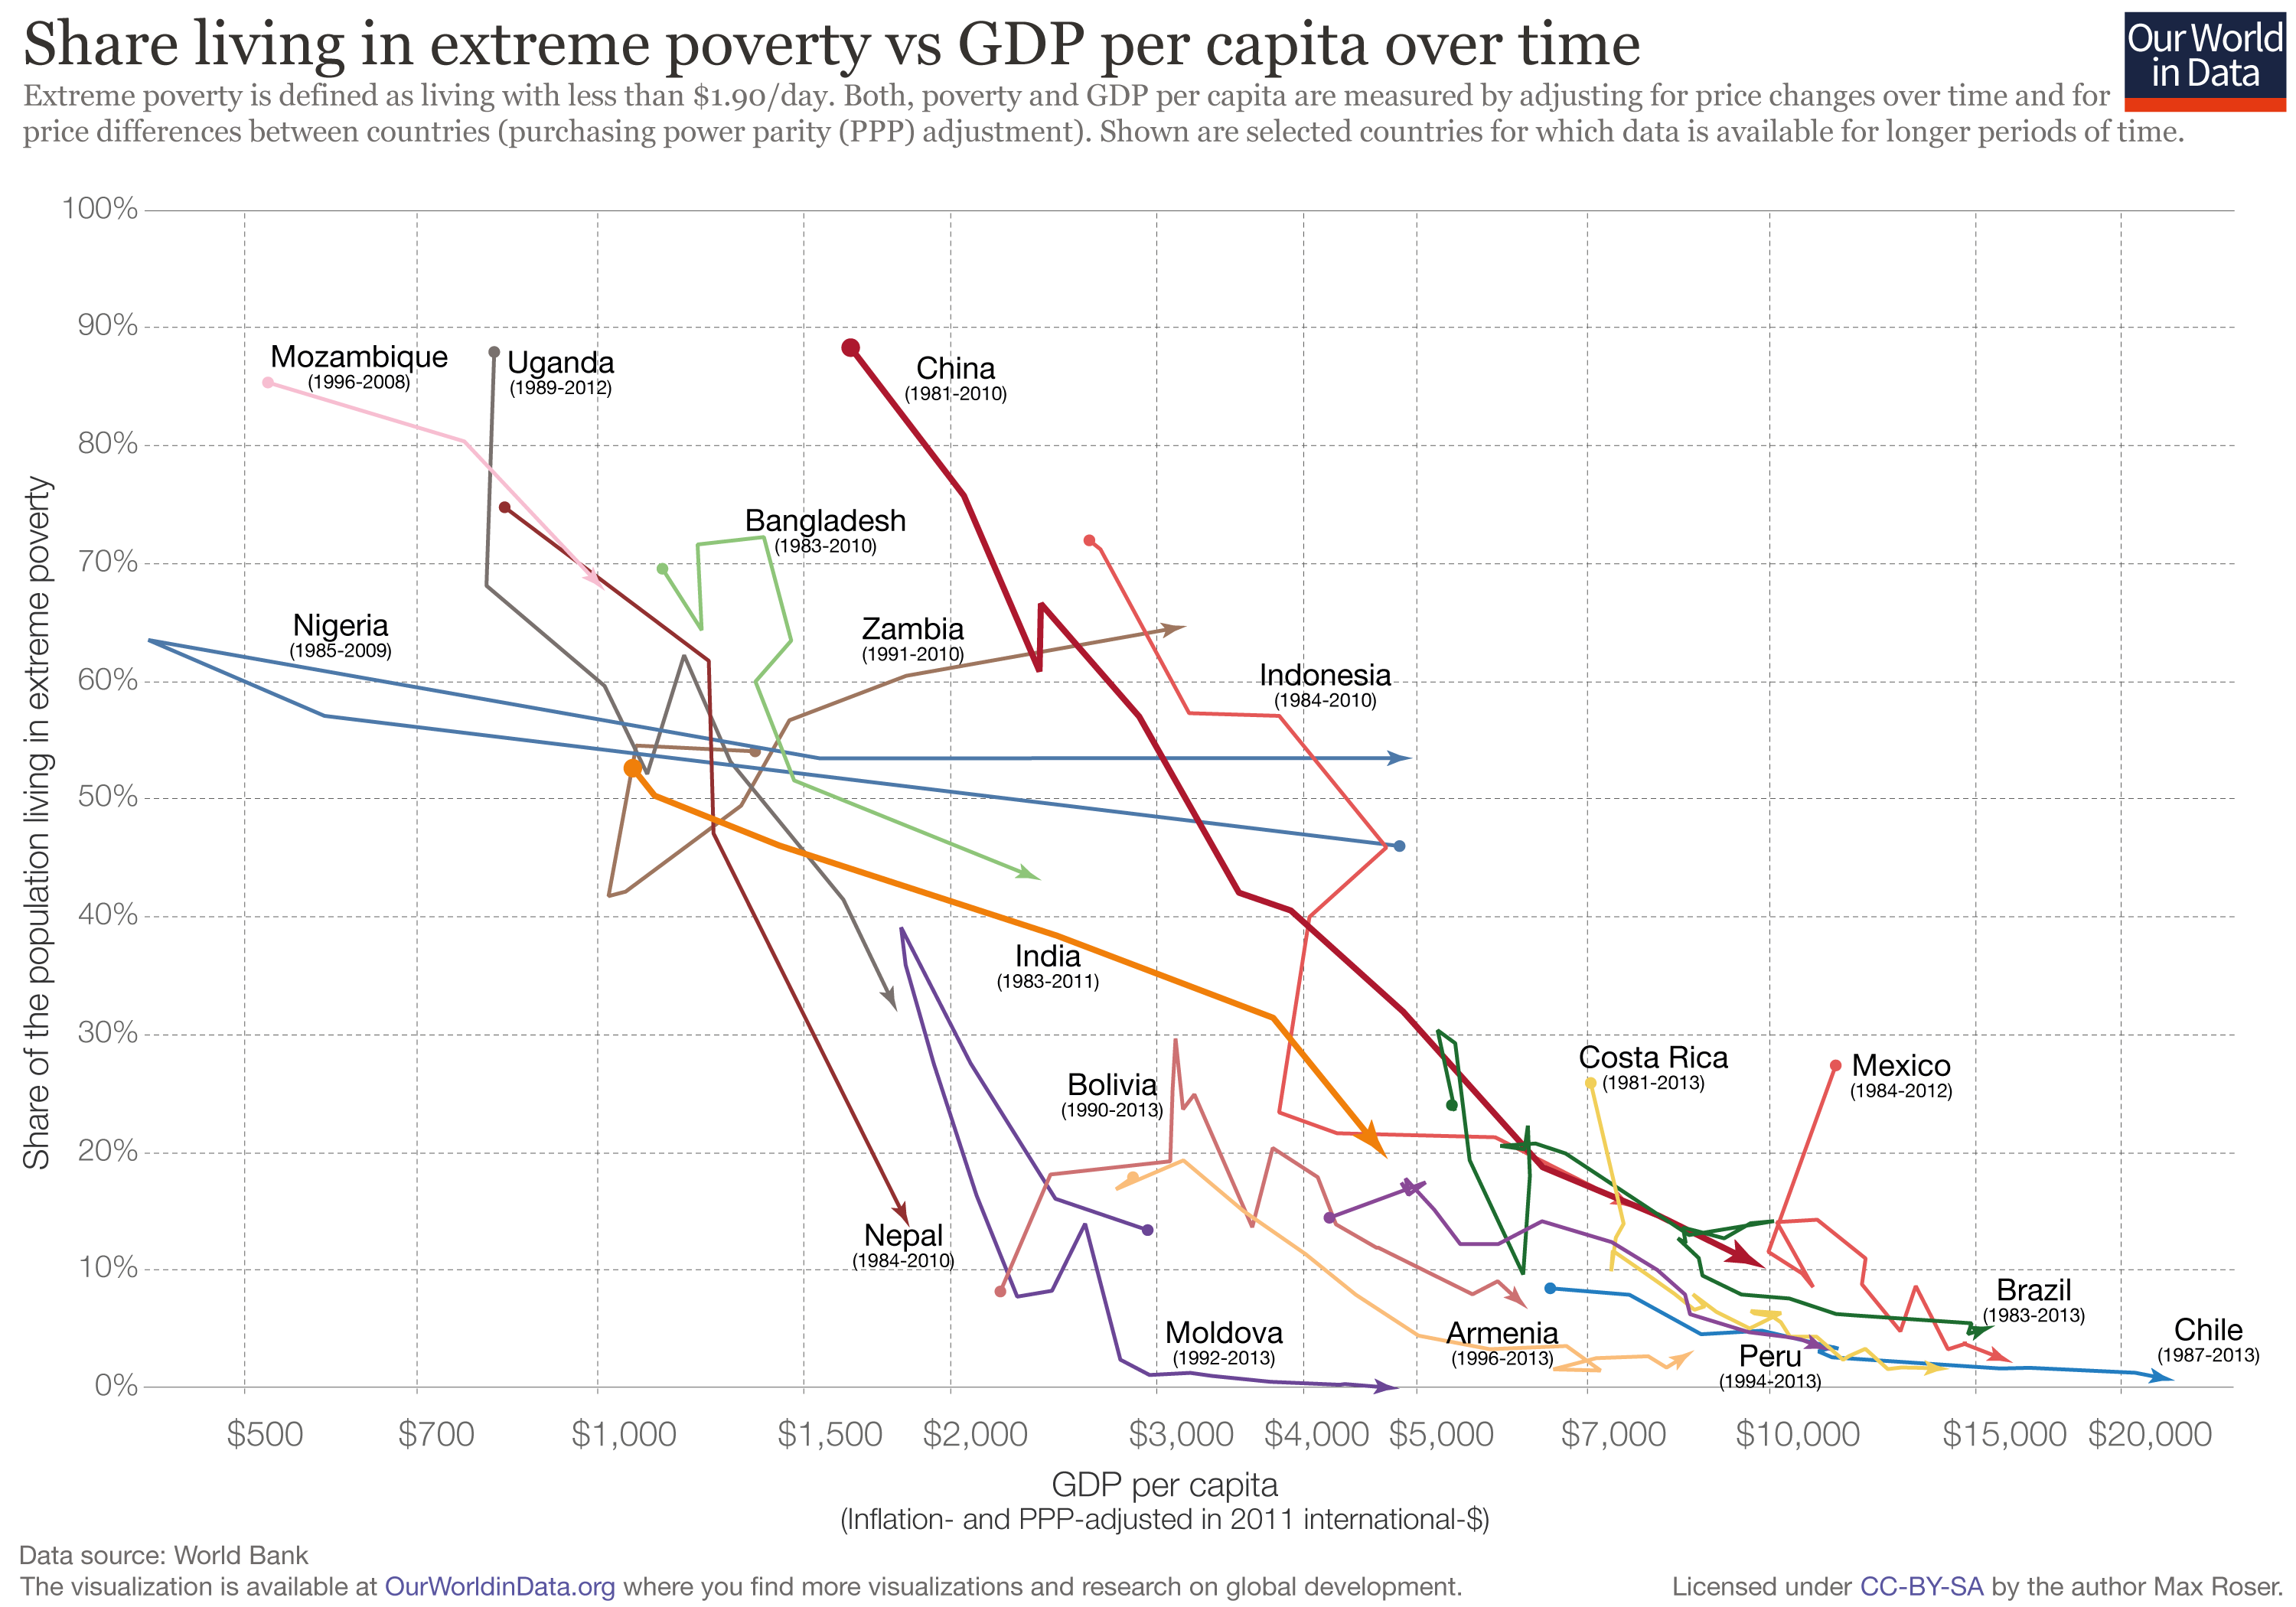 Extremely definition. Extreme poverty statistics. Poverty in the World rates. Extreme poverty where. Extreme poverty statistics 2017.